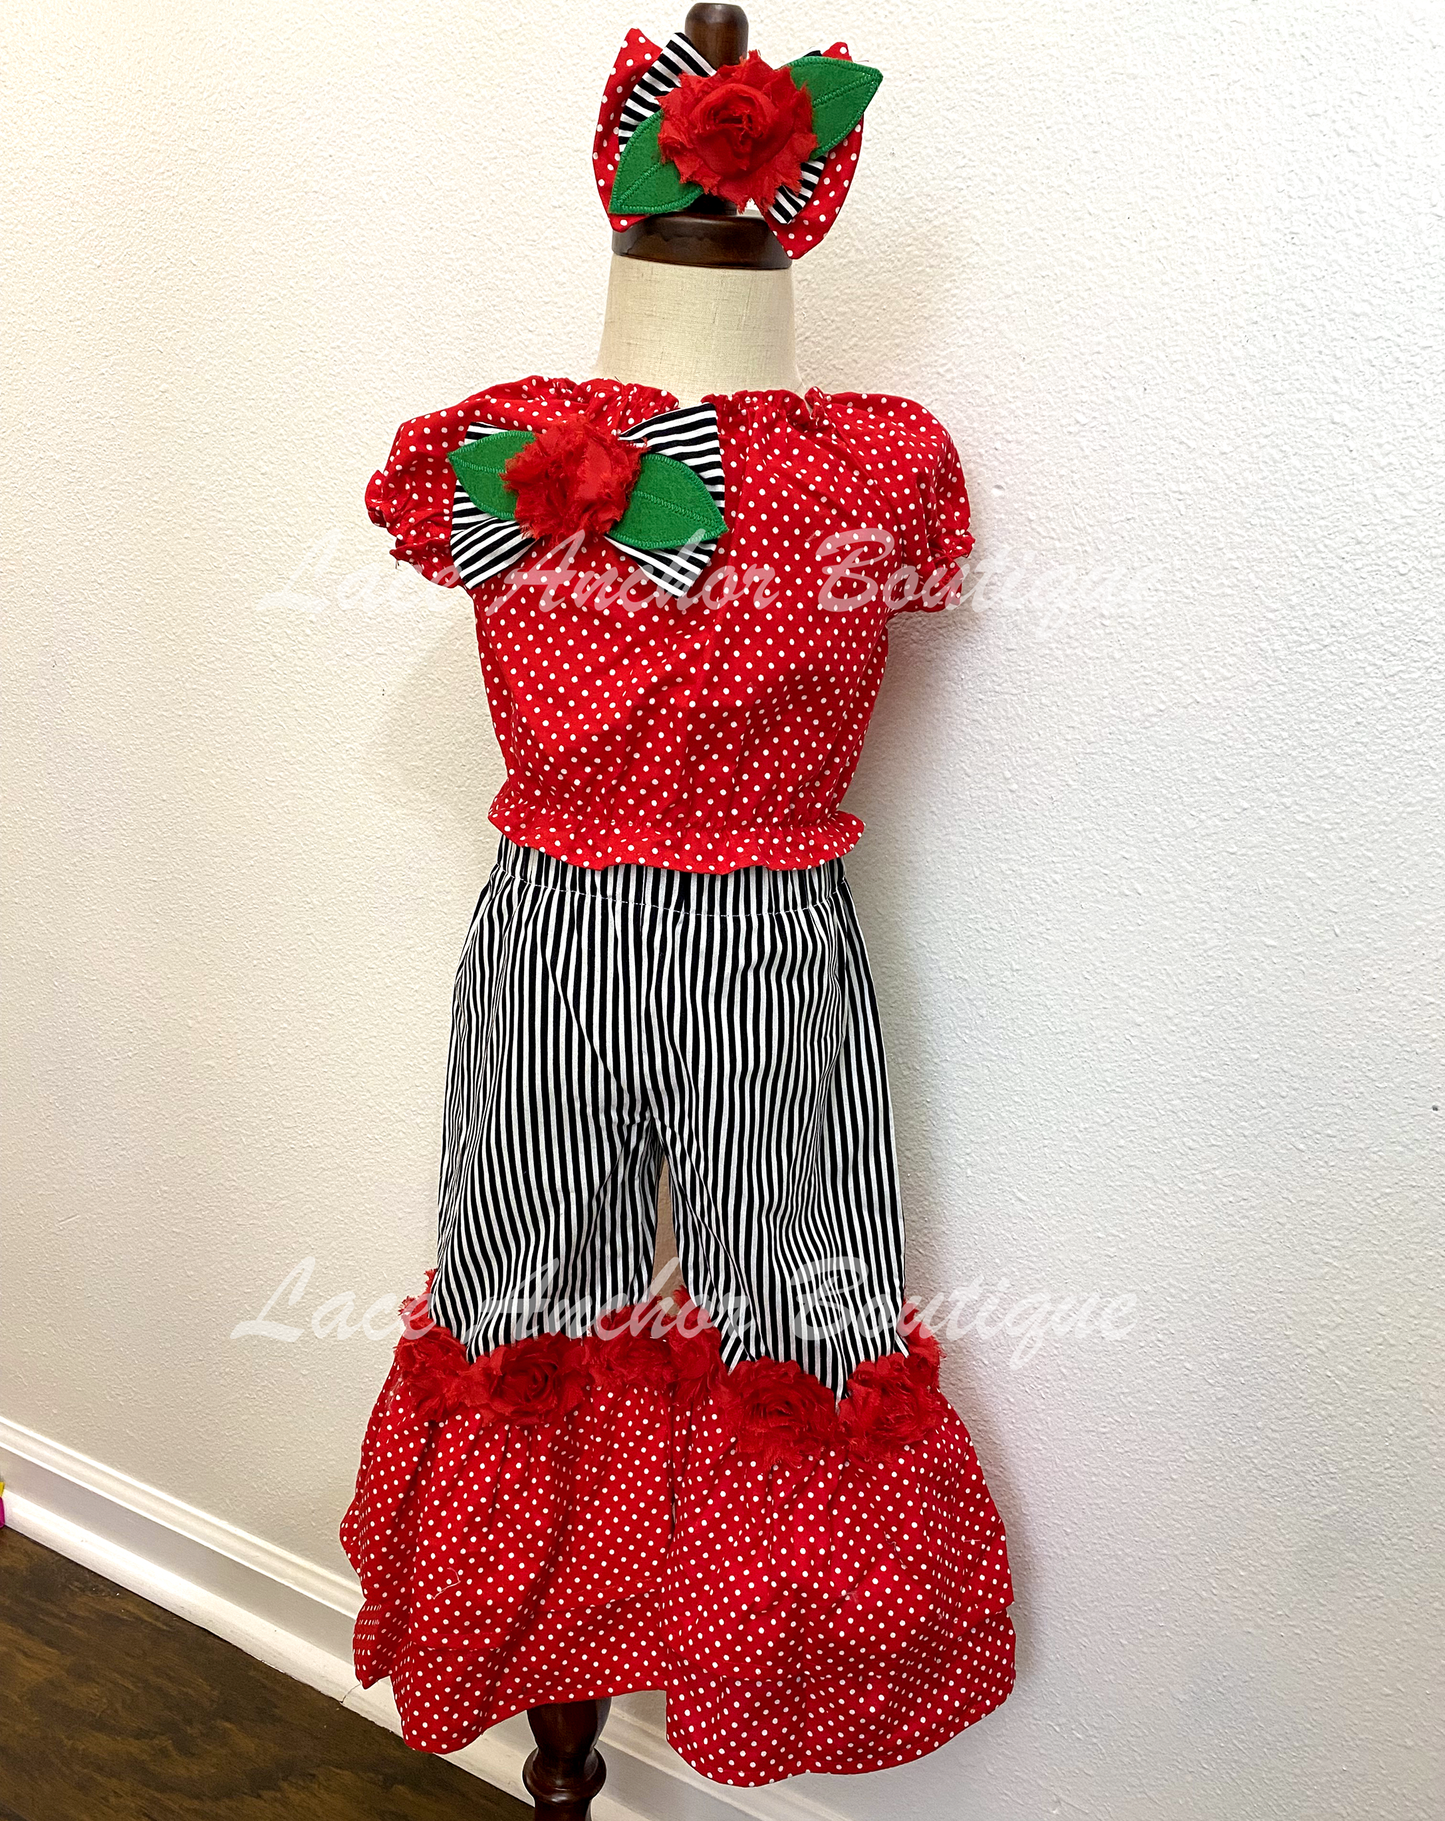 Girls 18M-2T One-of-a-Kind Red Rose Themed Outfit - Polka Dot & Stripes for Birthday or Pageant